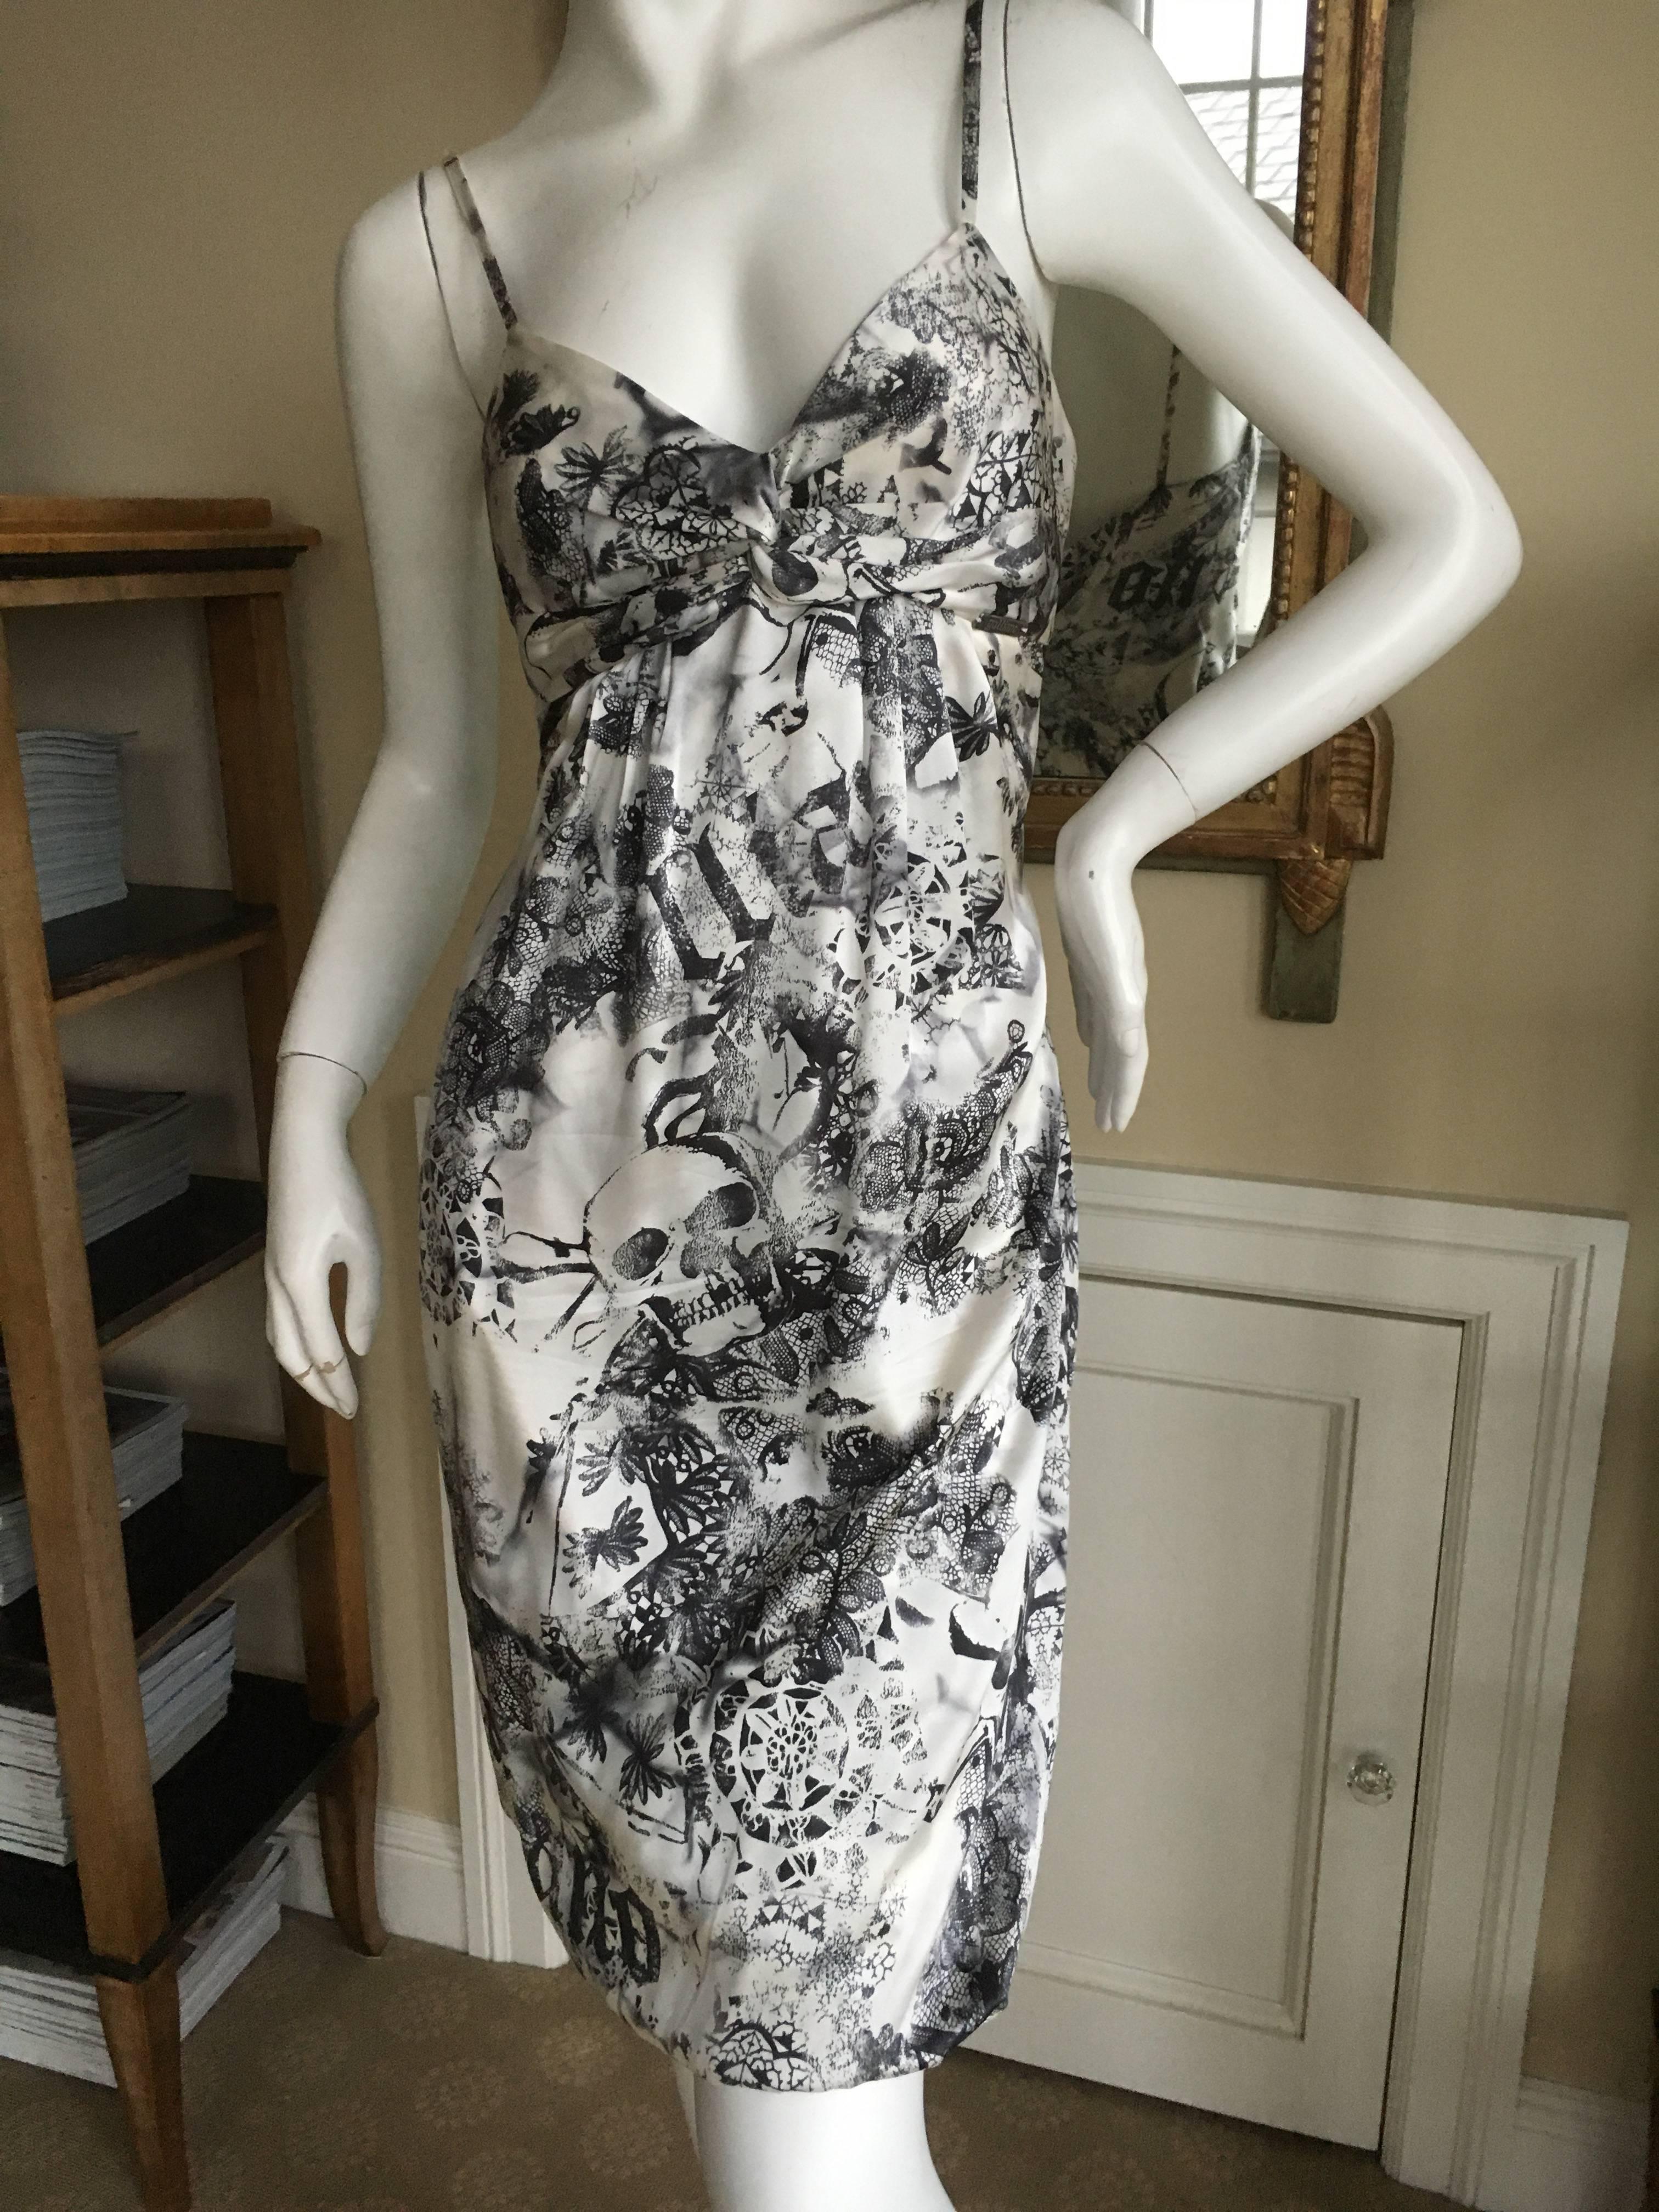 John Galliano Sweet Vintage Silk Cocktail Dress with Death Head Pattern
Size 40

Bust 36"
Waist 28"
 Hips 38"
 Length 40"
 Excellent condition